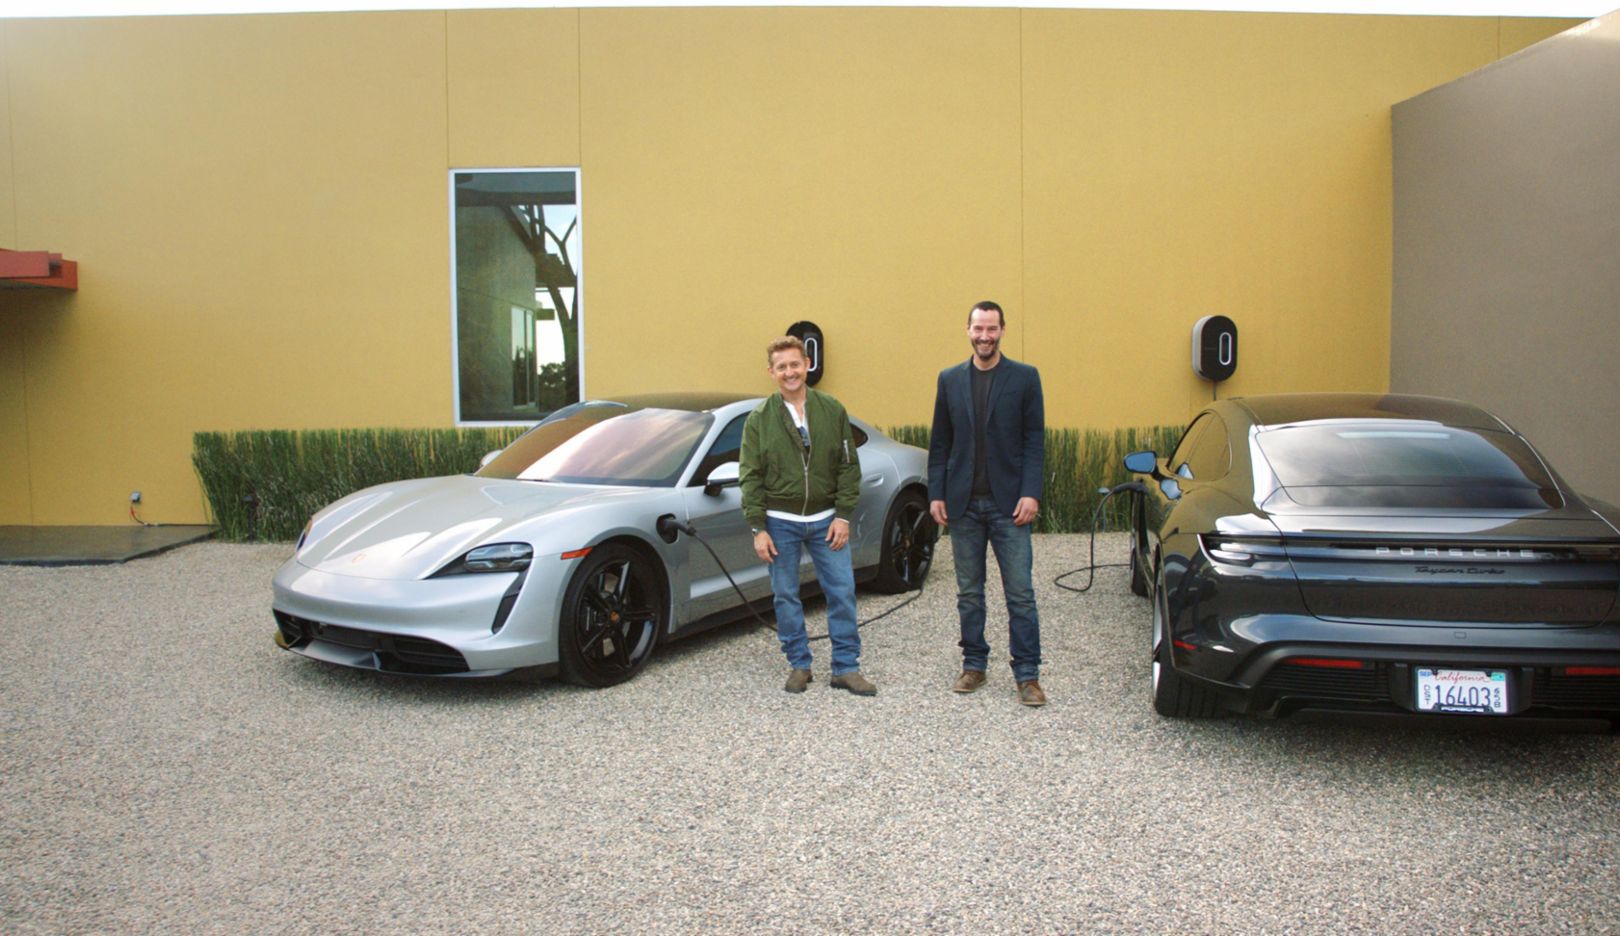 Keanu Reeves and Alex Winter test the Porsche Taycan in new film ‘Going the Distance’